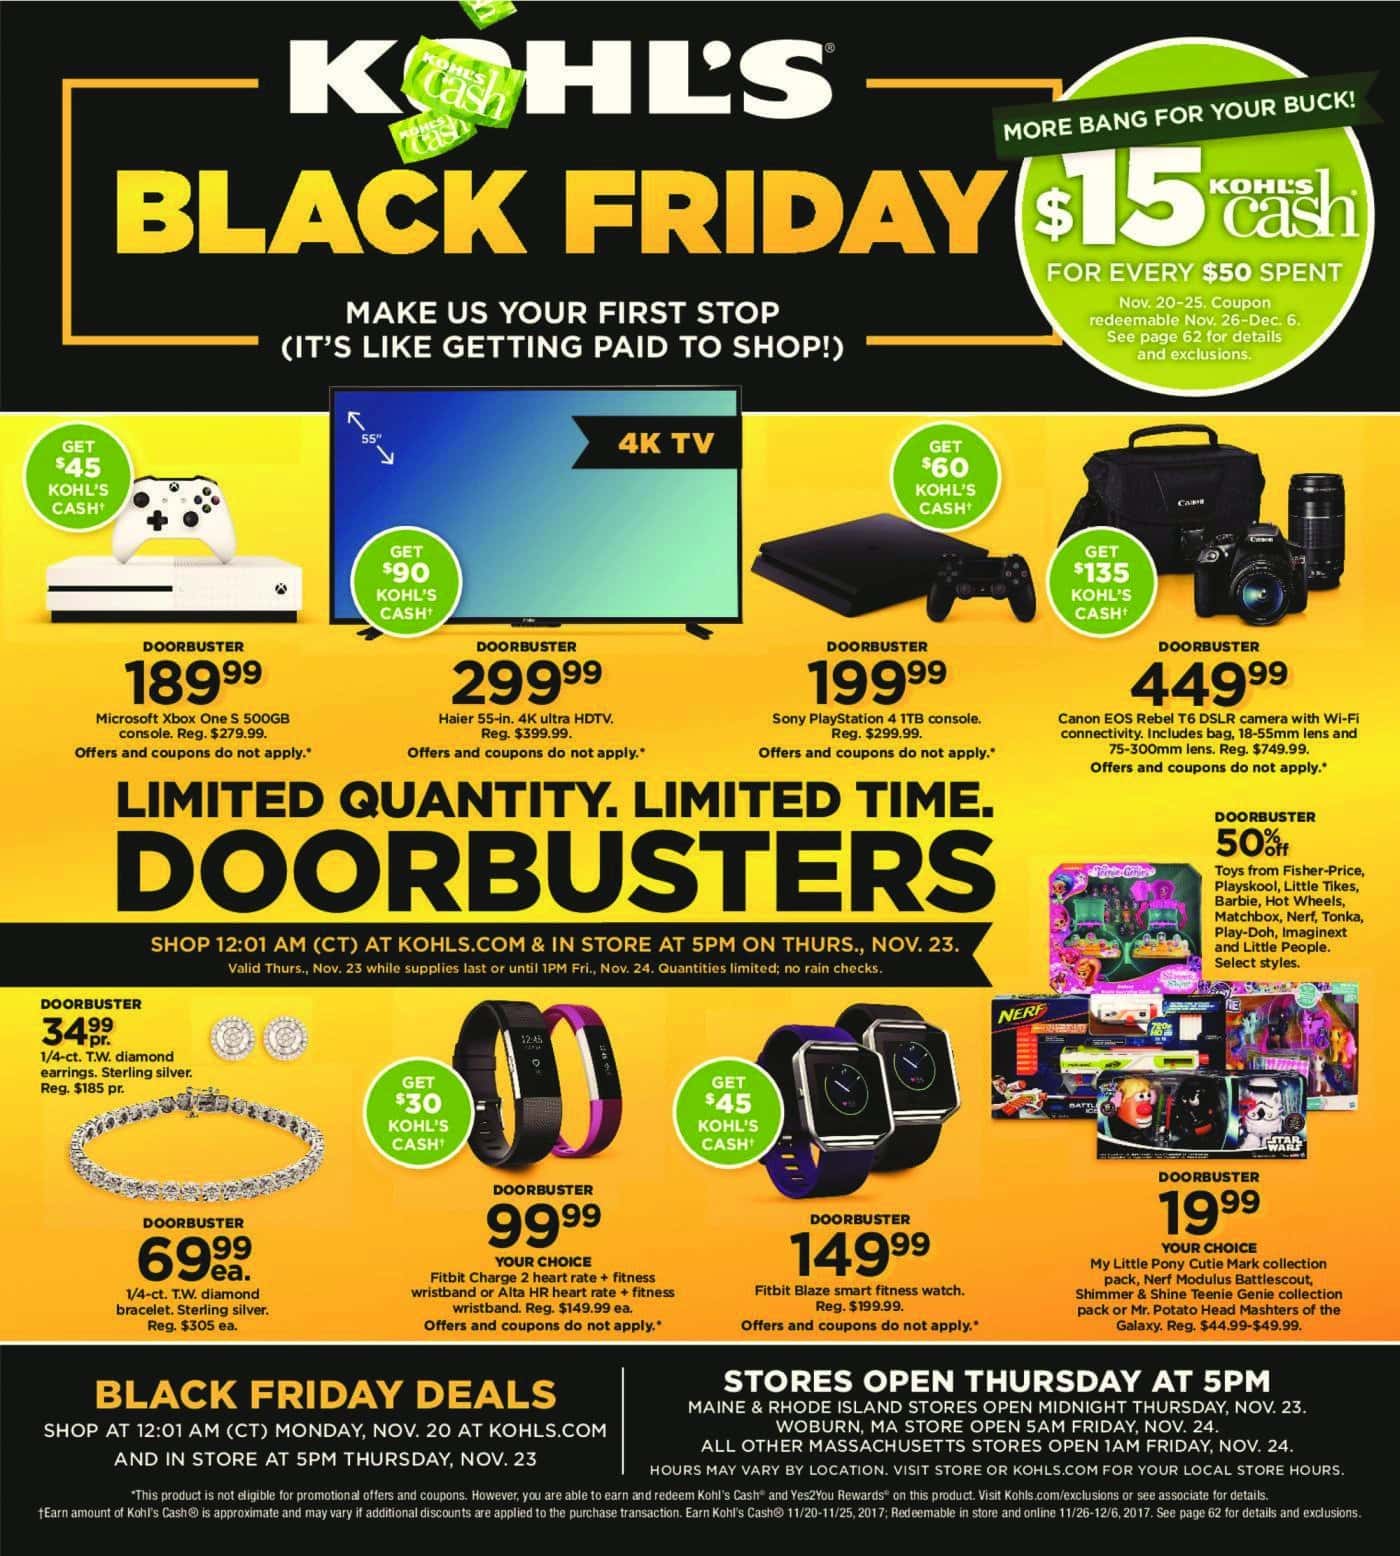 Kohl's Black Friday Deals for 2015 - What Are Black Friday Deals 2015